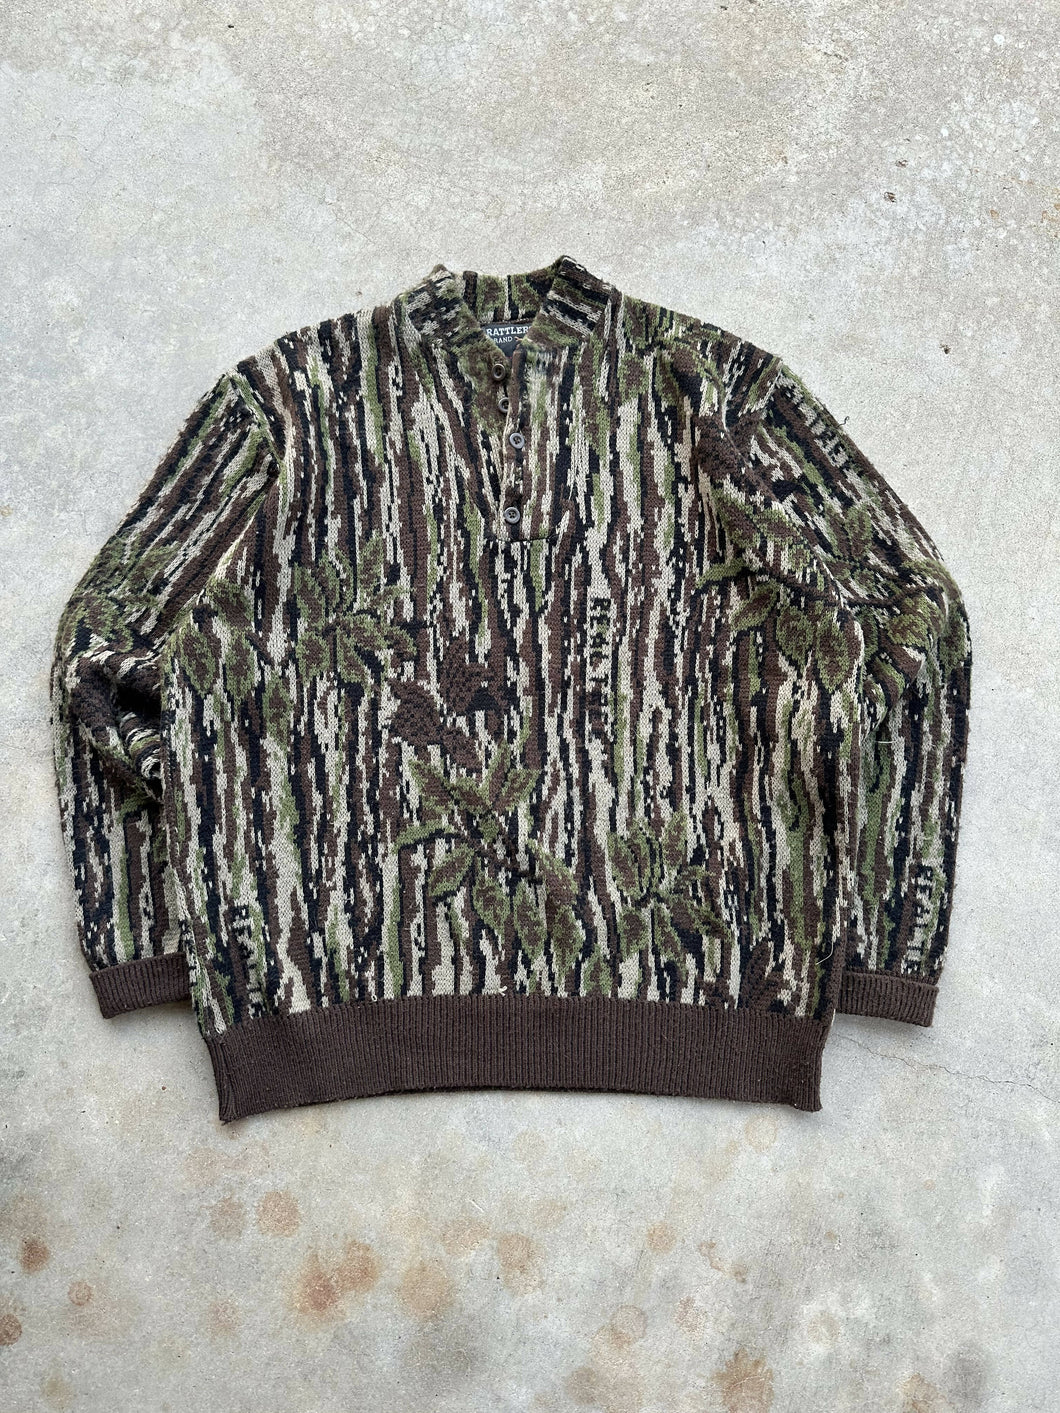 Vintage 90s Rattlers Brand Real Tree Camo Bomber Jacket Size 2XL Made USA 